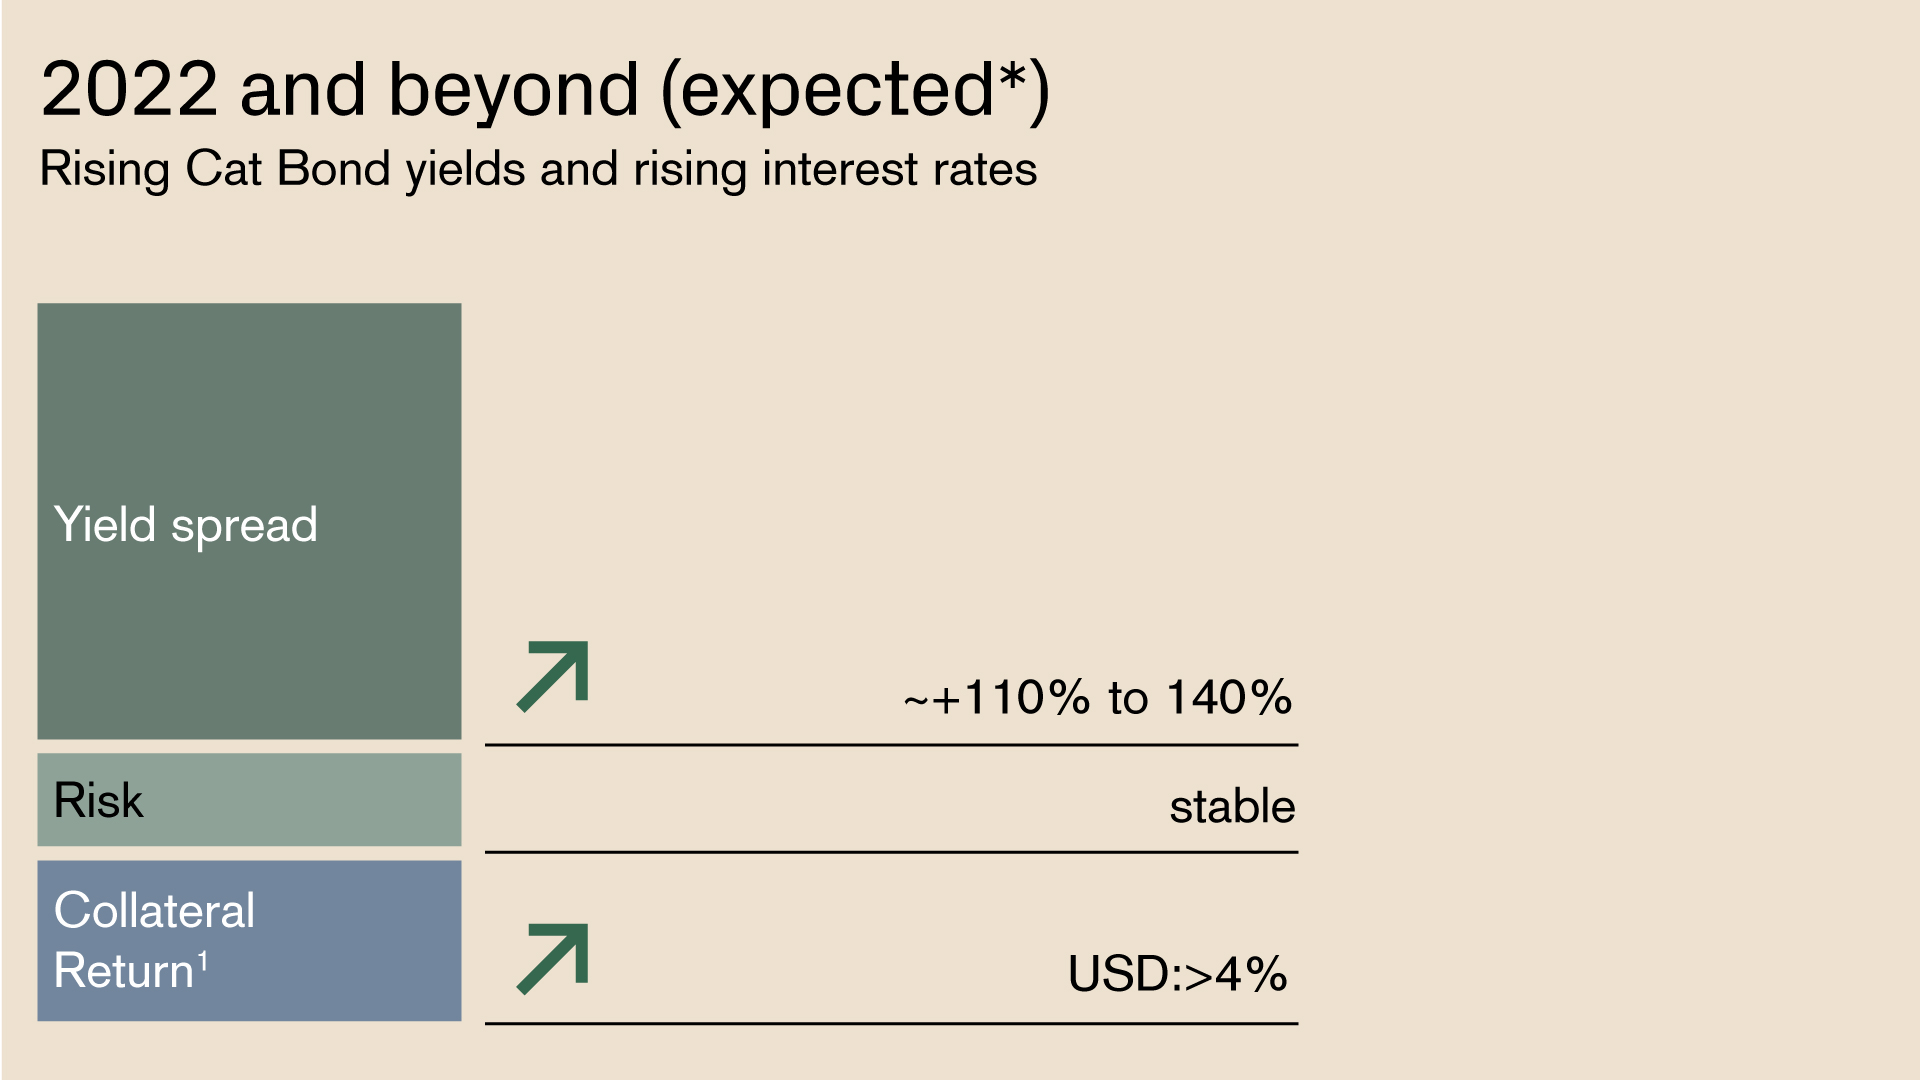 Illustration of the projected development of the yield spread, risk and collateral yield for Cat Bonds for 2022 and beyond